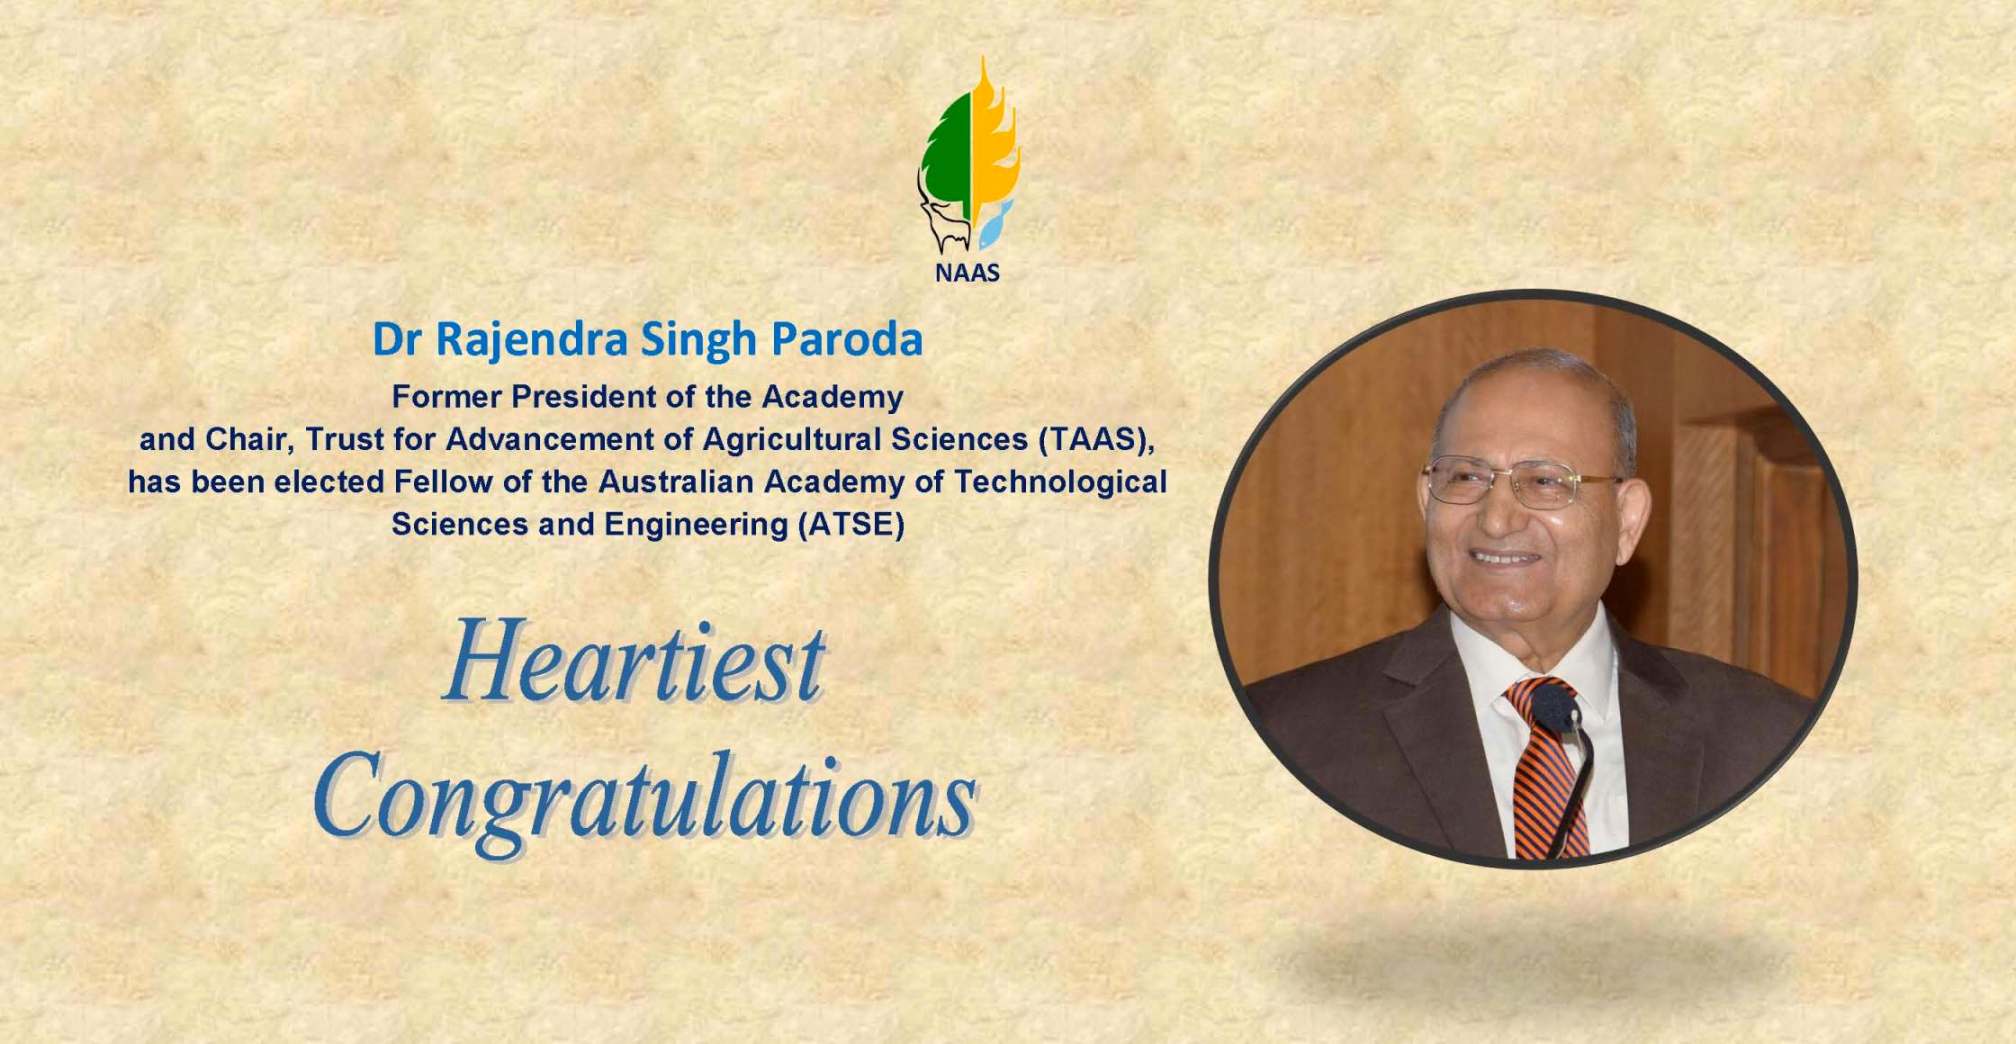 Dr. R.S. Paroda, Former President of the Academy and Chair, TAAS has been elected Fellow of the Australian Academy of Technological Sciences and Engineering (ATSE)